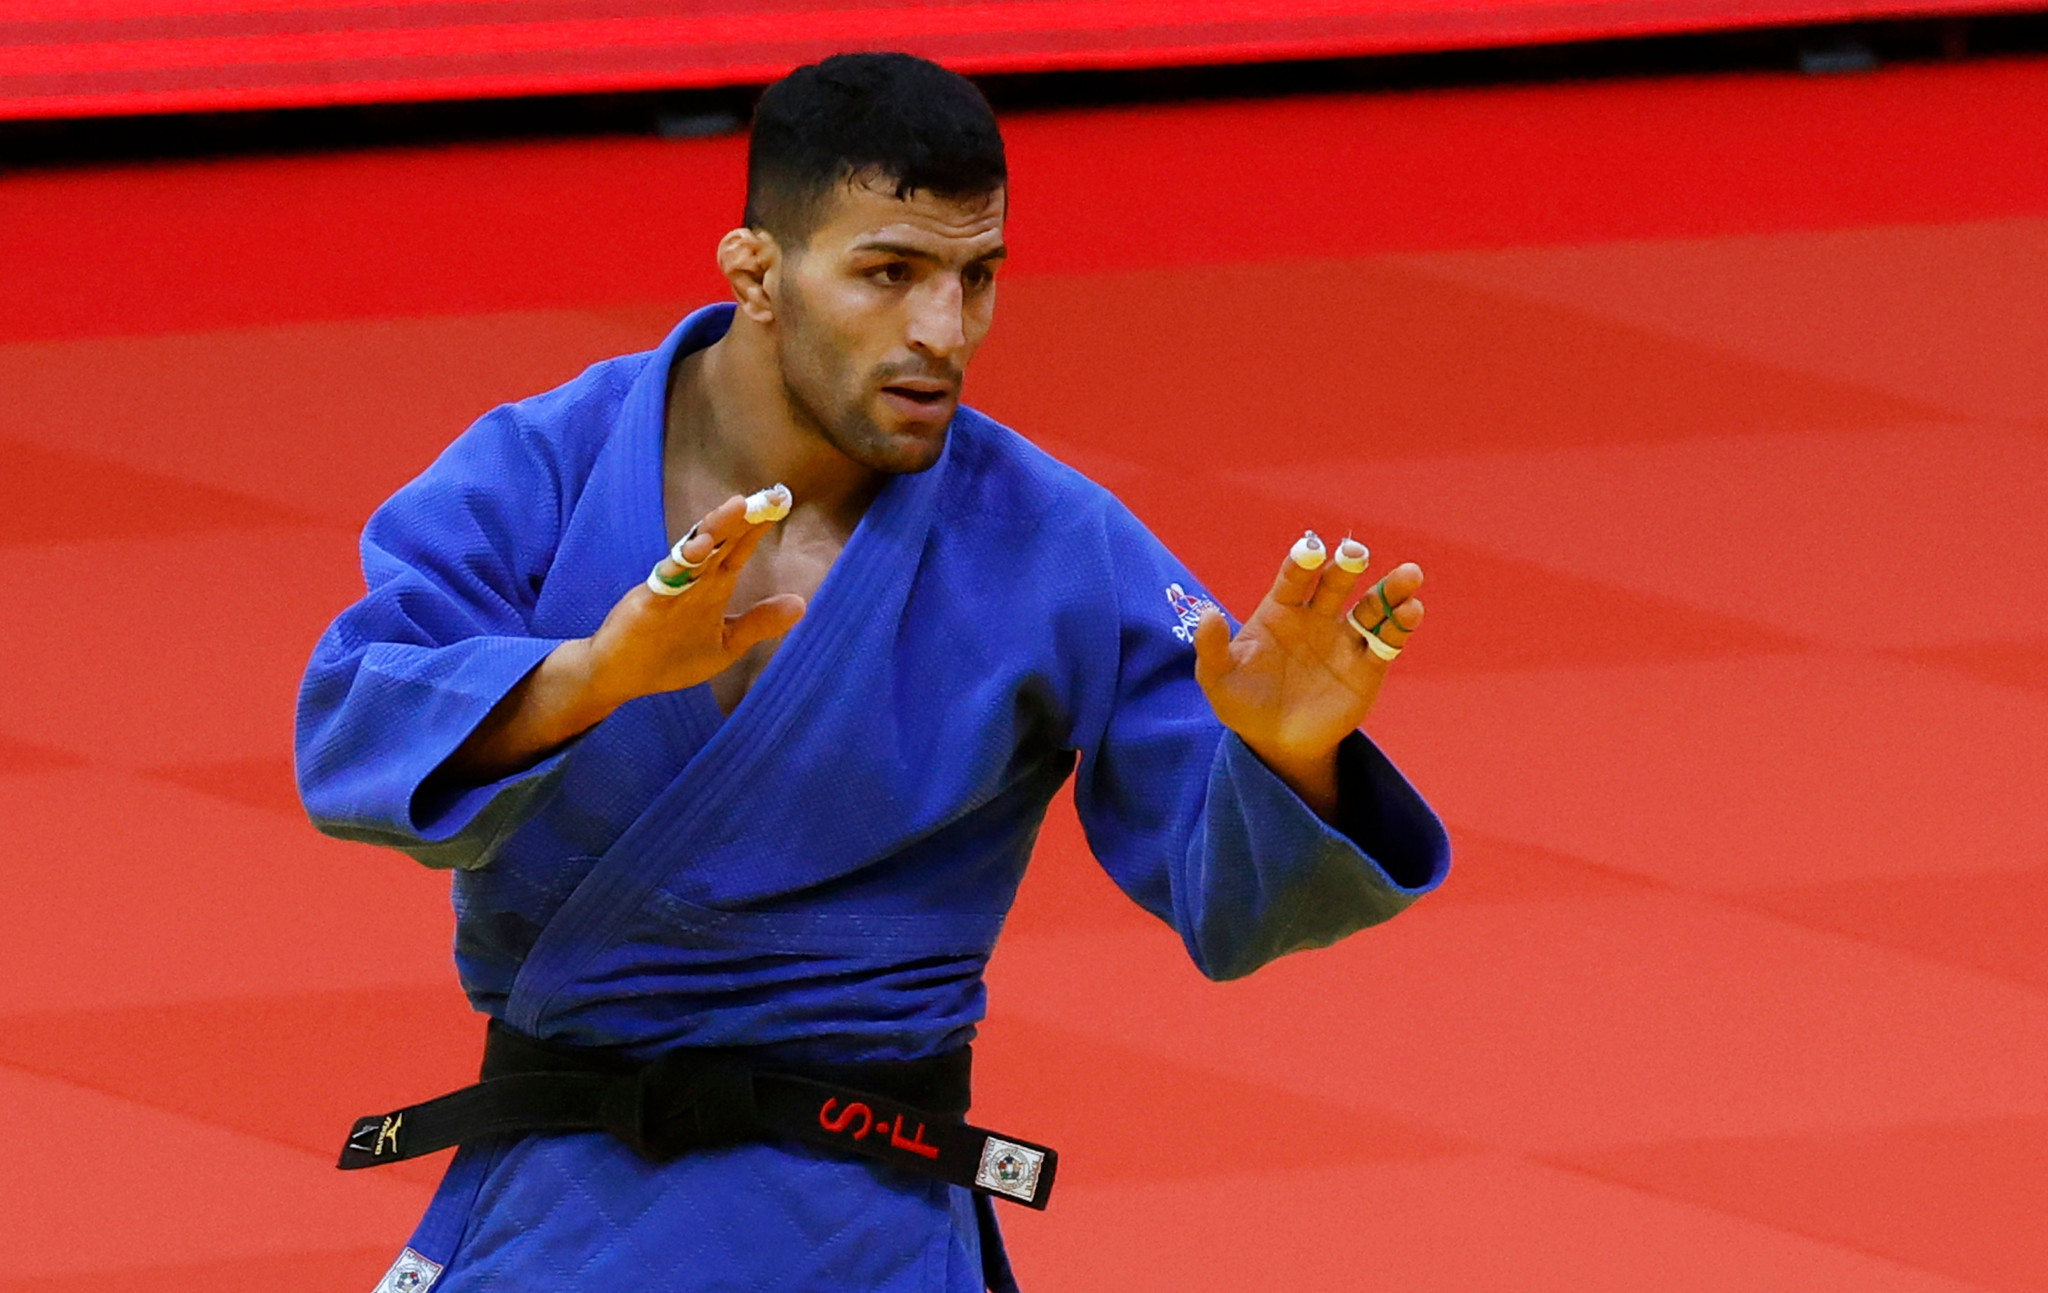 The Iran Judo Federation had received a warning from the IJF after Saeid Mollaei withdrew from several events ©Getty Images